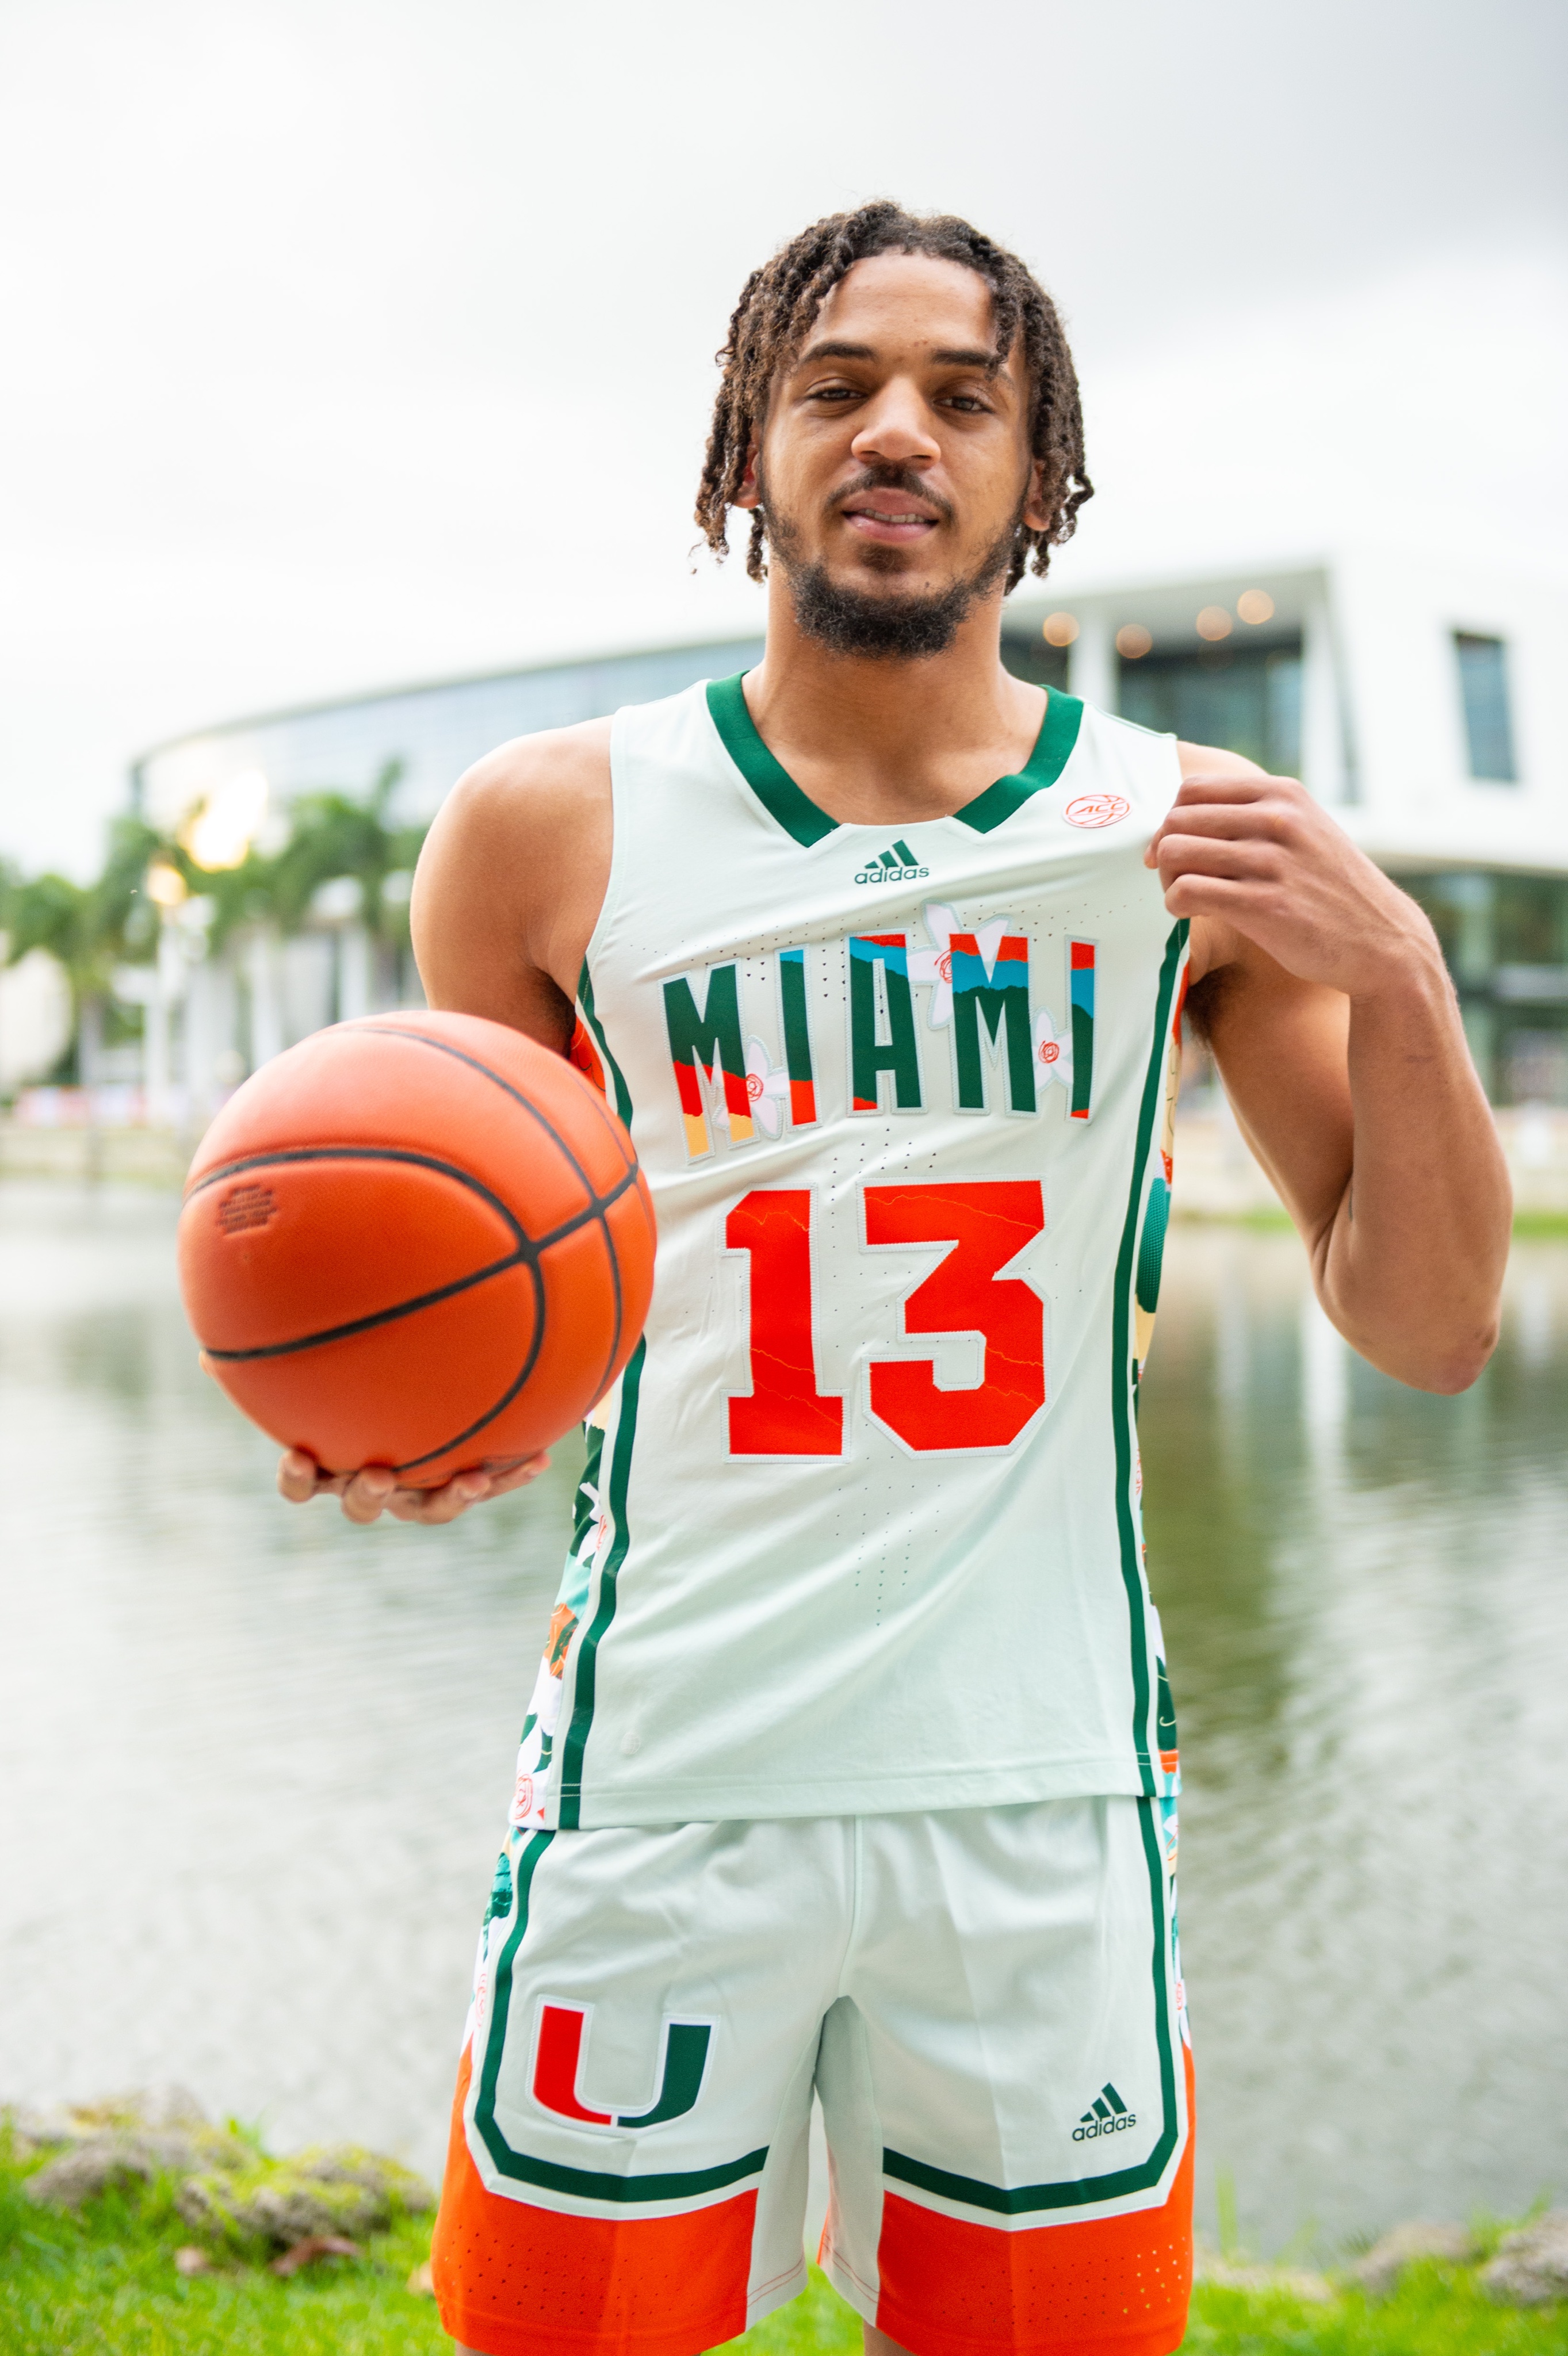 FOX College Hoops on X: In today's game, Miami will be debuting their  'Honoring Black Excellence' uniforms to celebrate and honor the  achievements of Black individuals and Black culture as a whole (